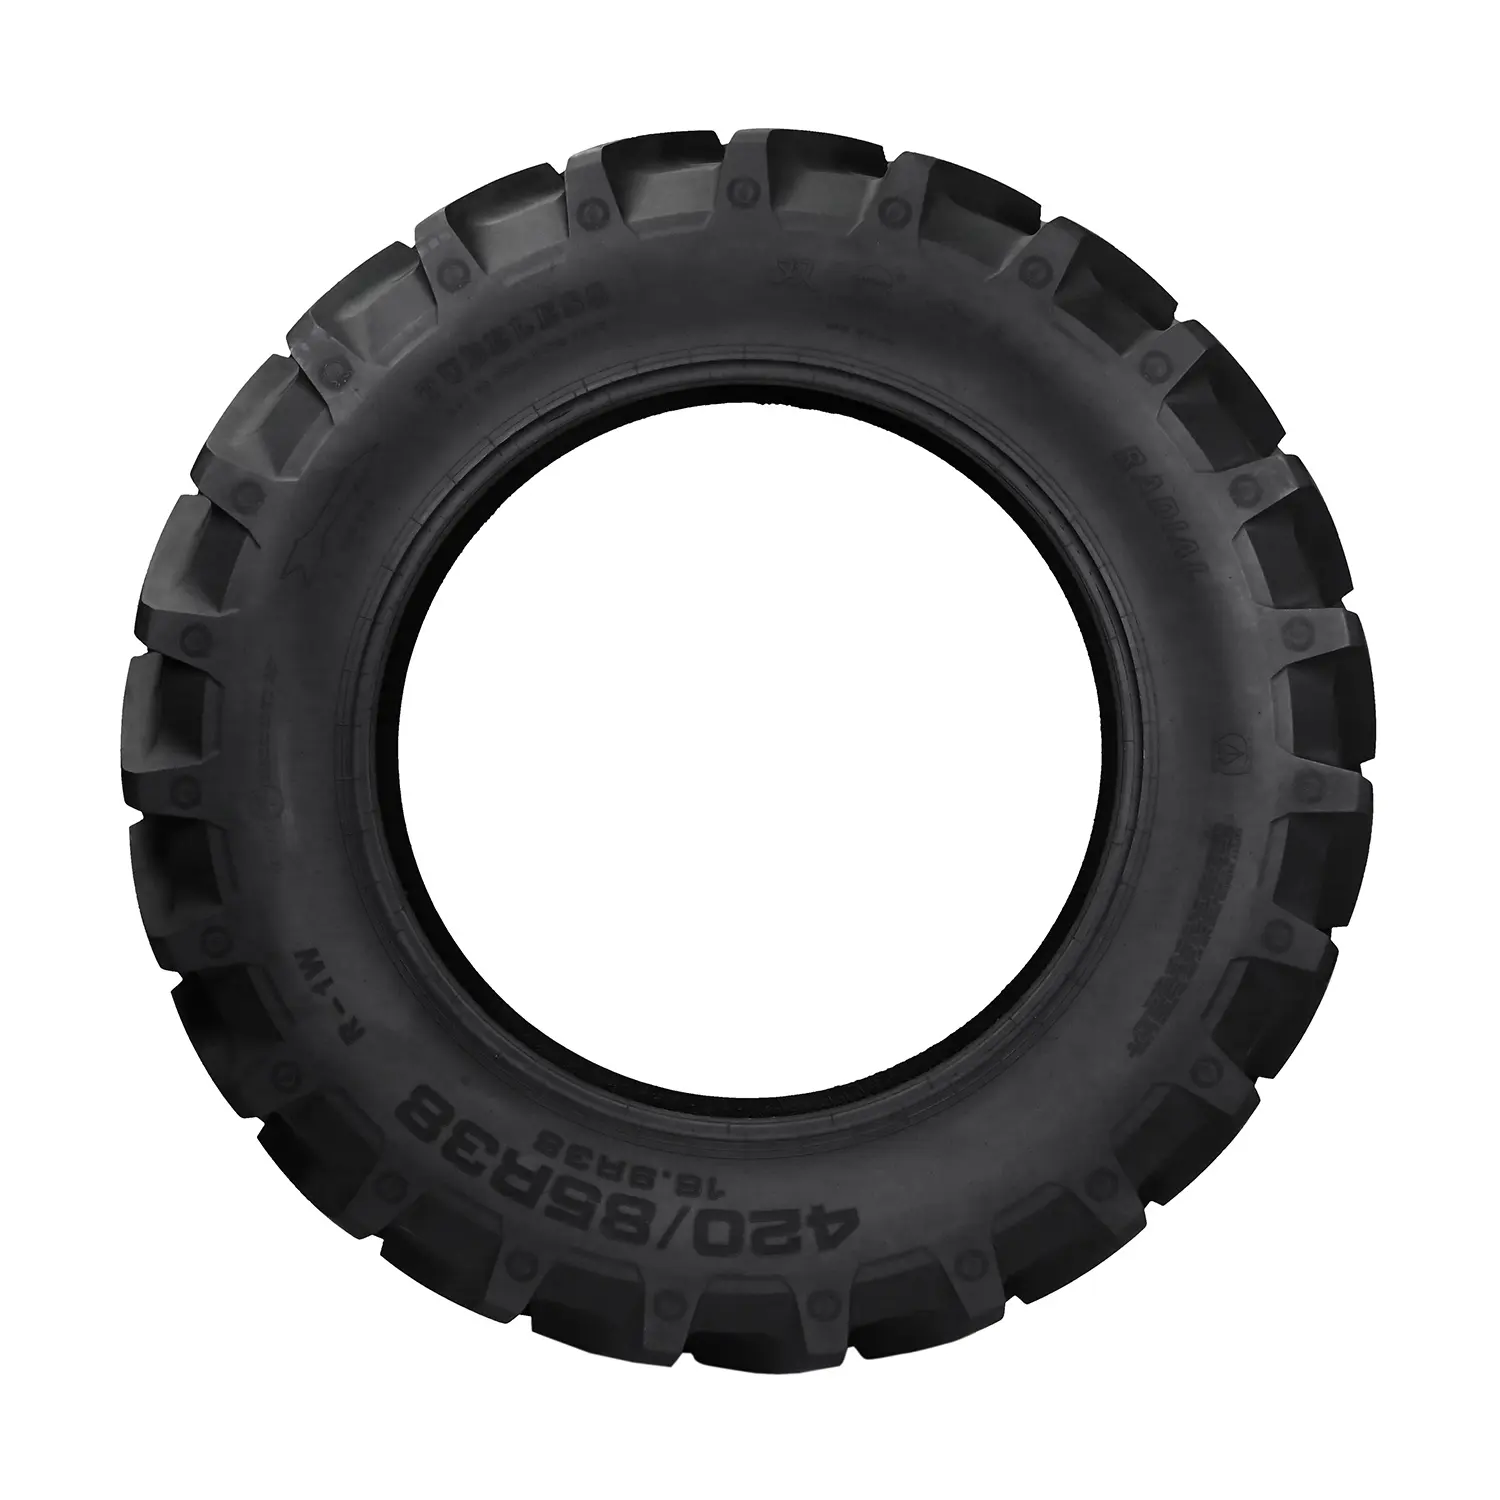 China Top TRUST R-1w Radial Agricultural Tire 460/85R38 TL